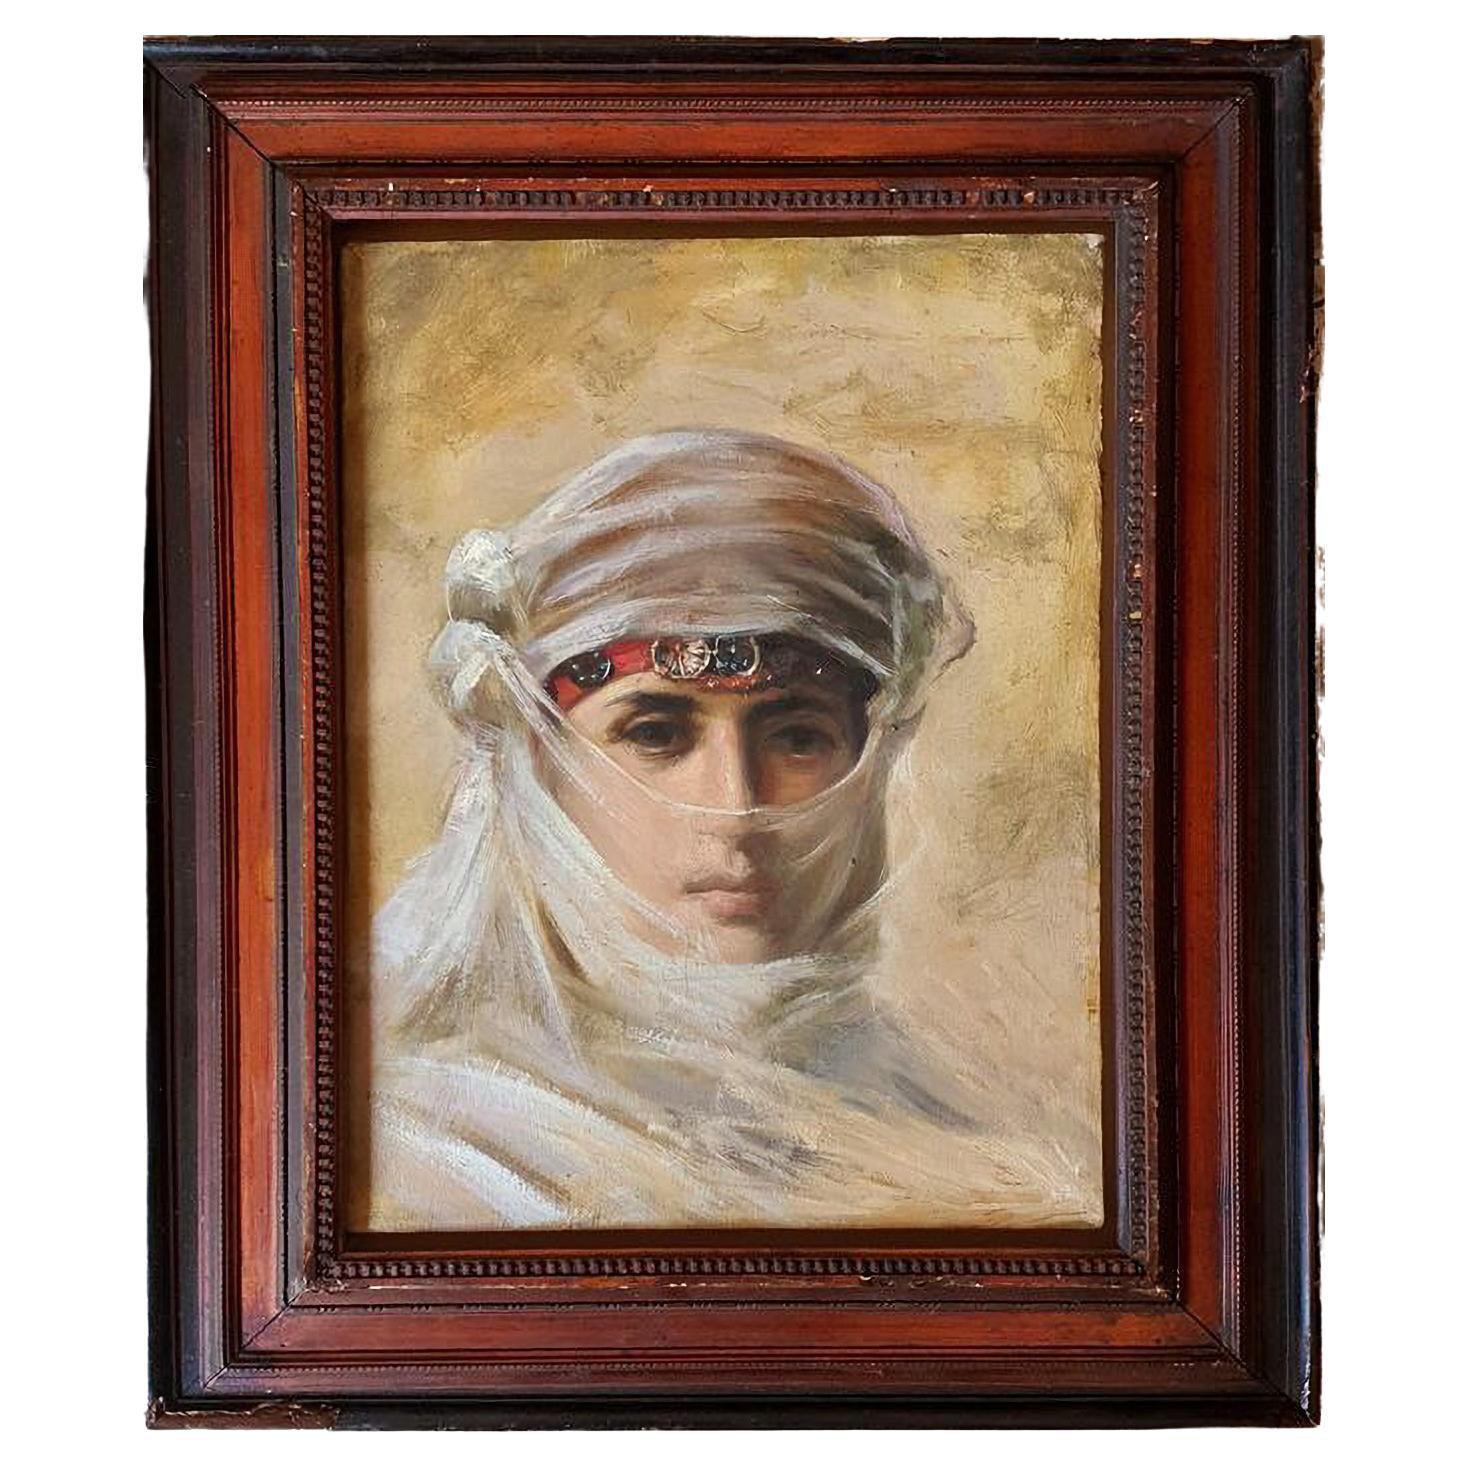 Oriental Scool Portrait of a Young Arab Princess. Oil painting on canvas late 1930s. Intense portrait of a mysterious young Princess of the desert.